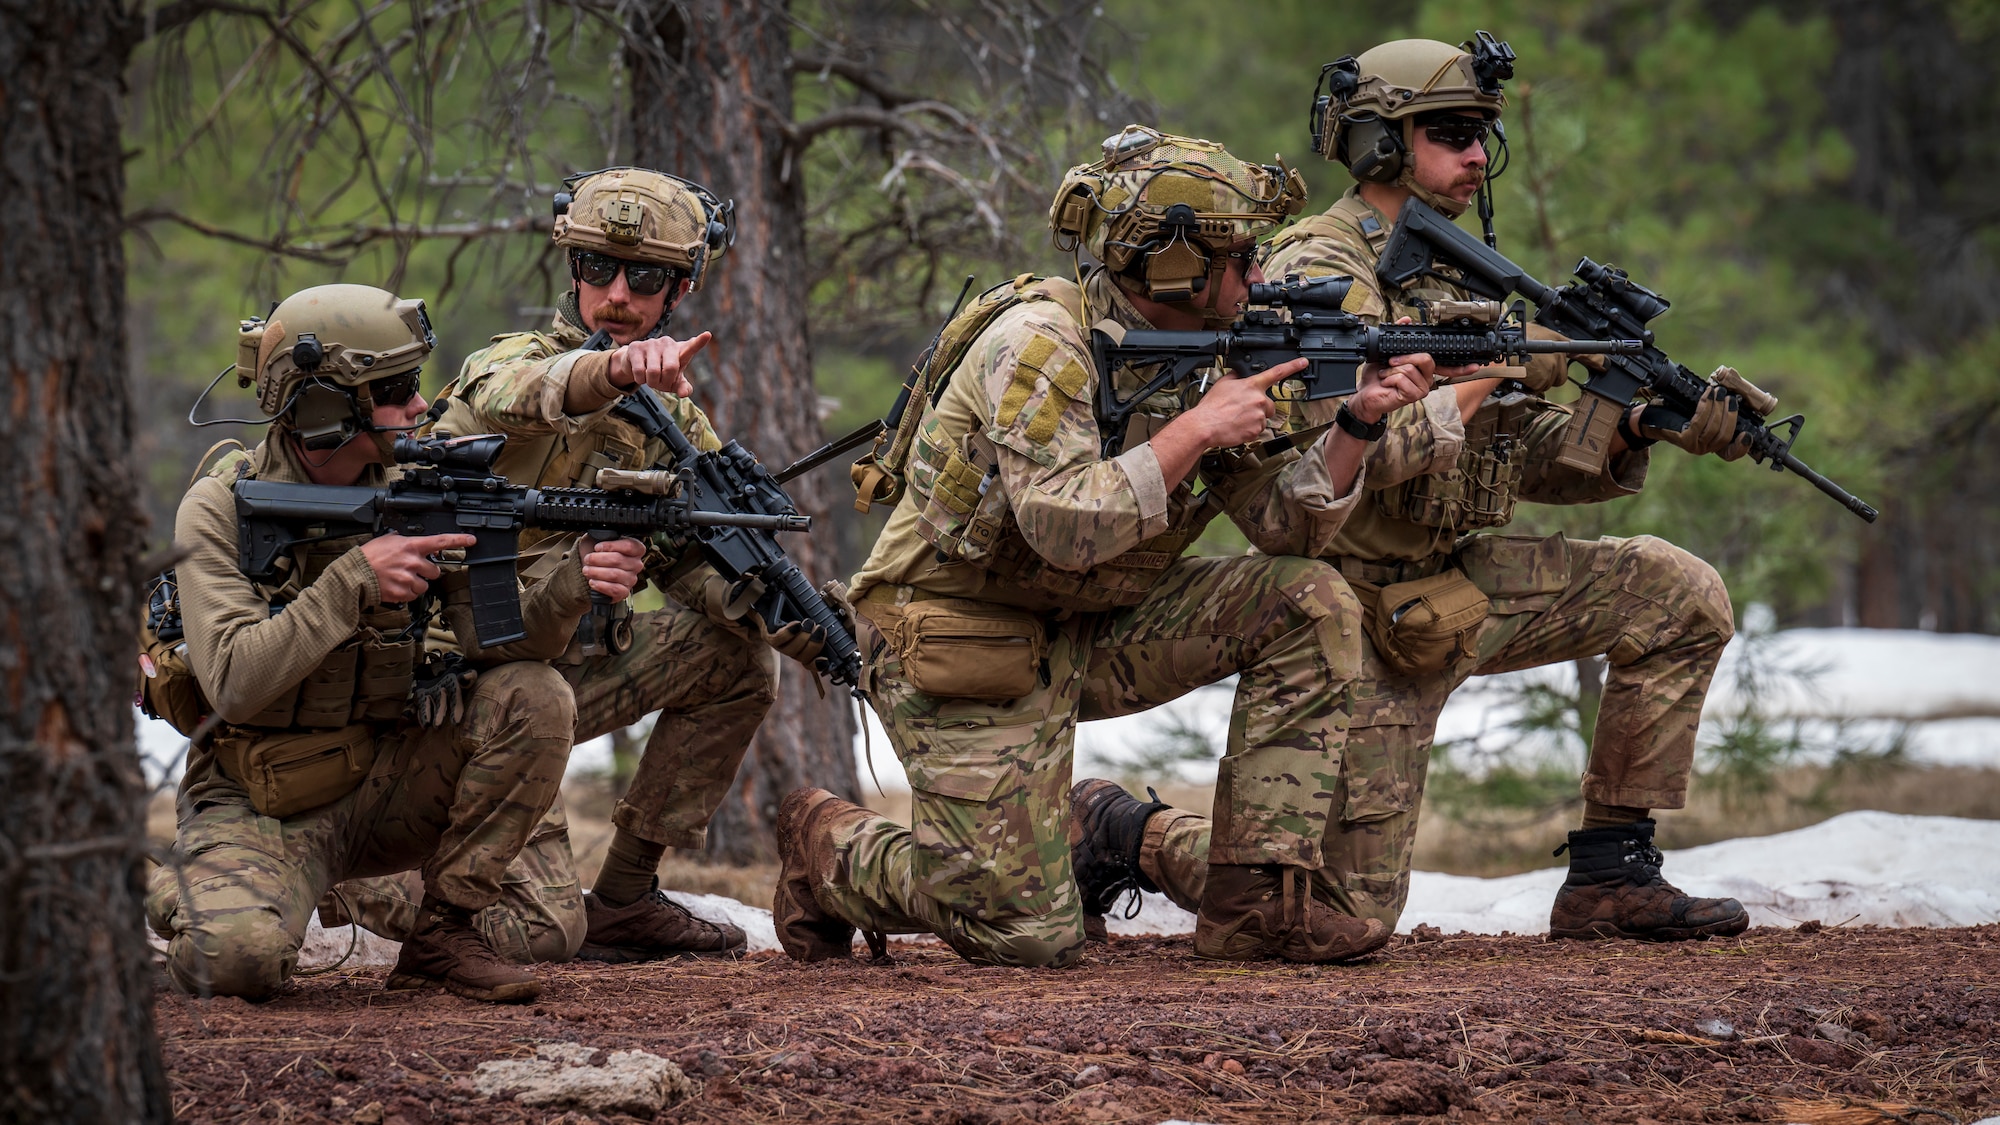 U.S. Air Force Master Sgt. Nikolas Kenna (center left), 56th Civil Engineer Squadron Explosive Ordnance Disposal flight technician, leads a group of Airmen assigned to the 56th CES EOD flight during a training scenario at Camp Navajo, Arizona, April 12, 2023.